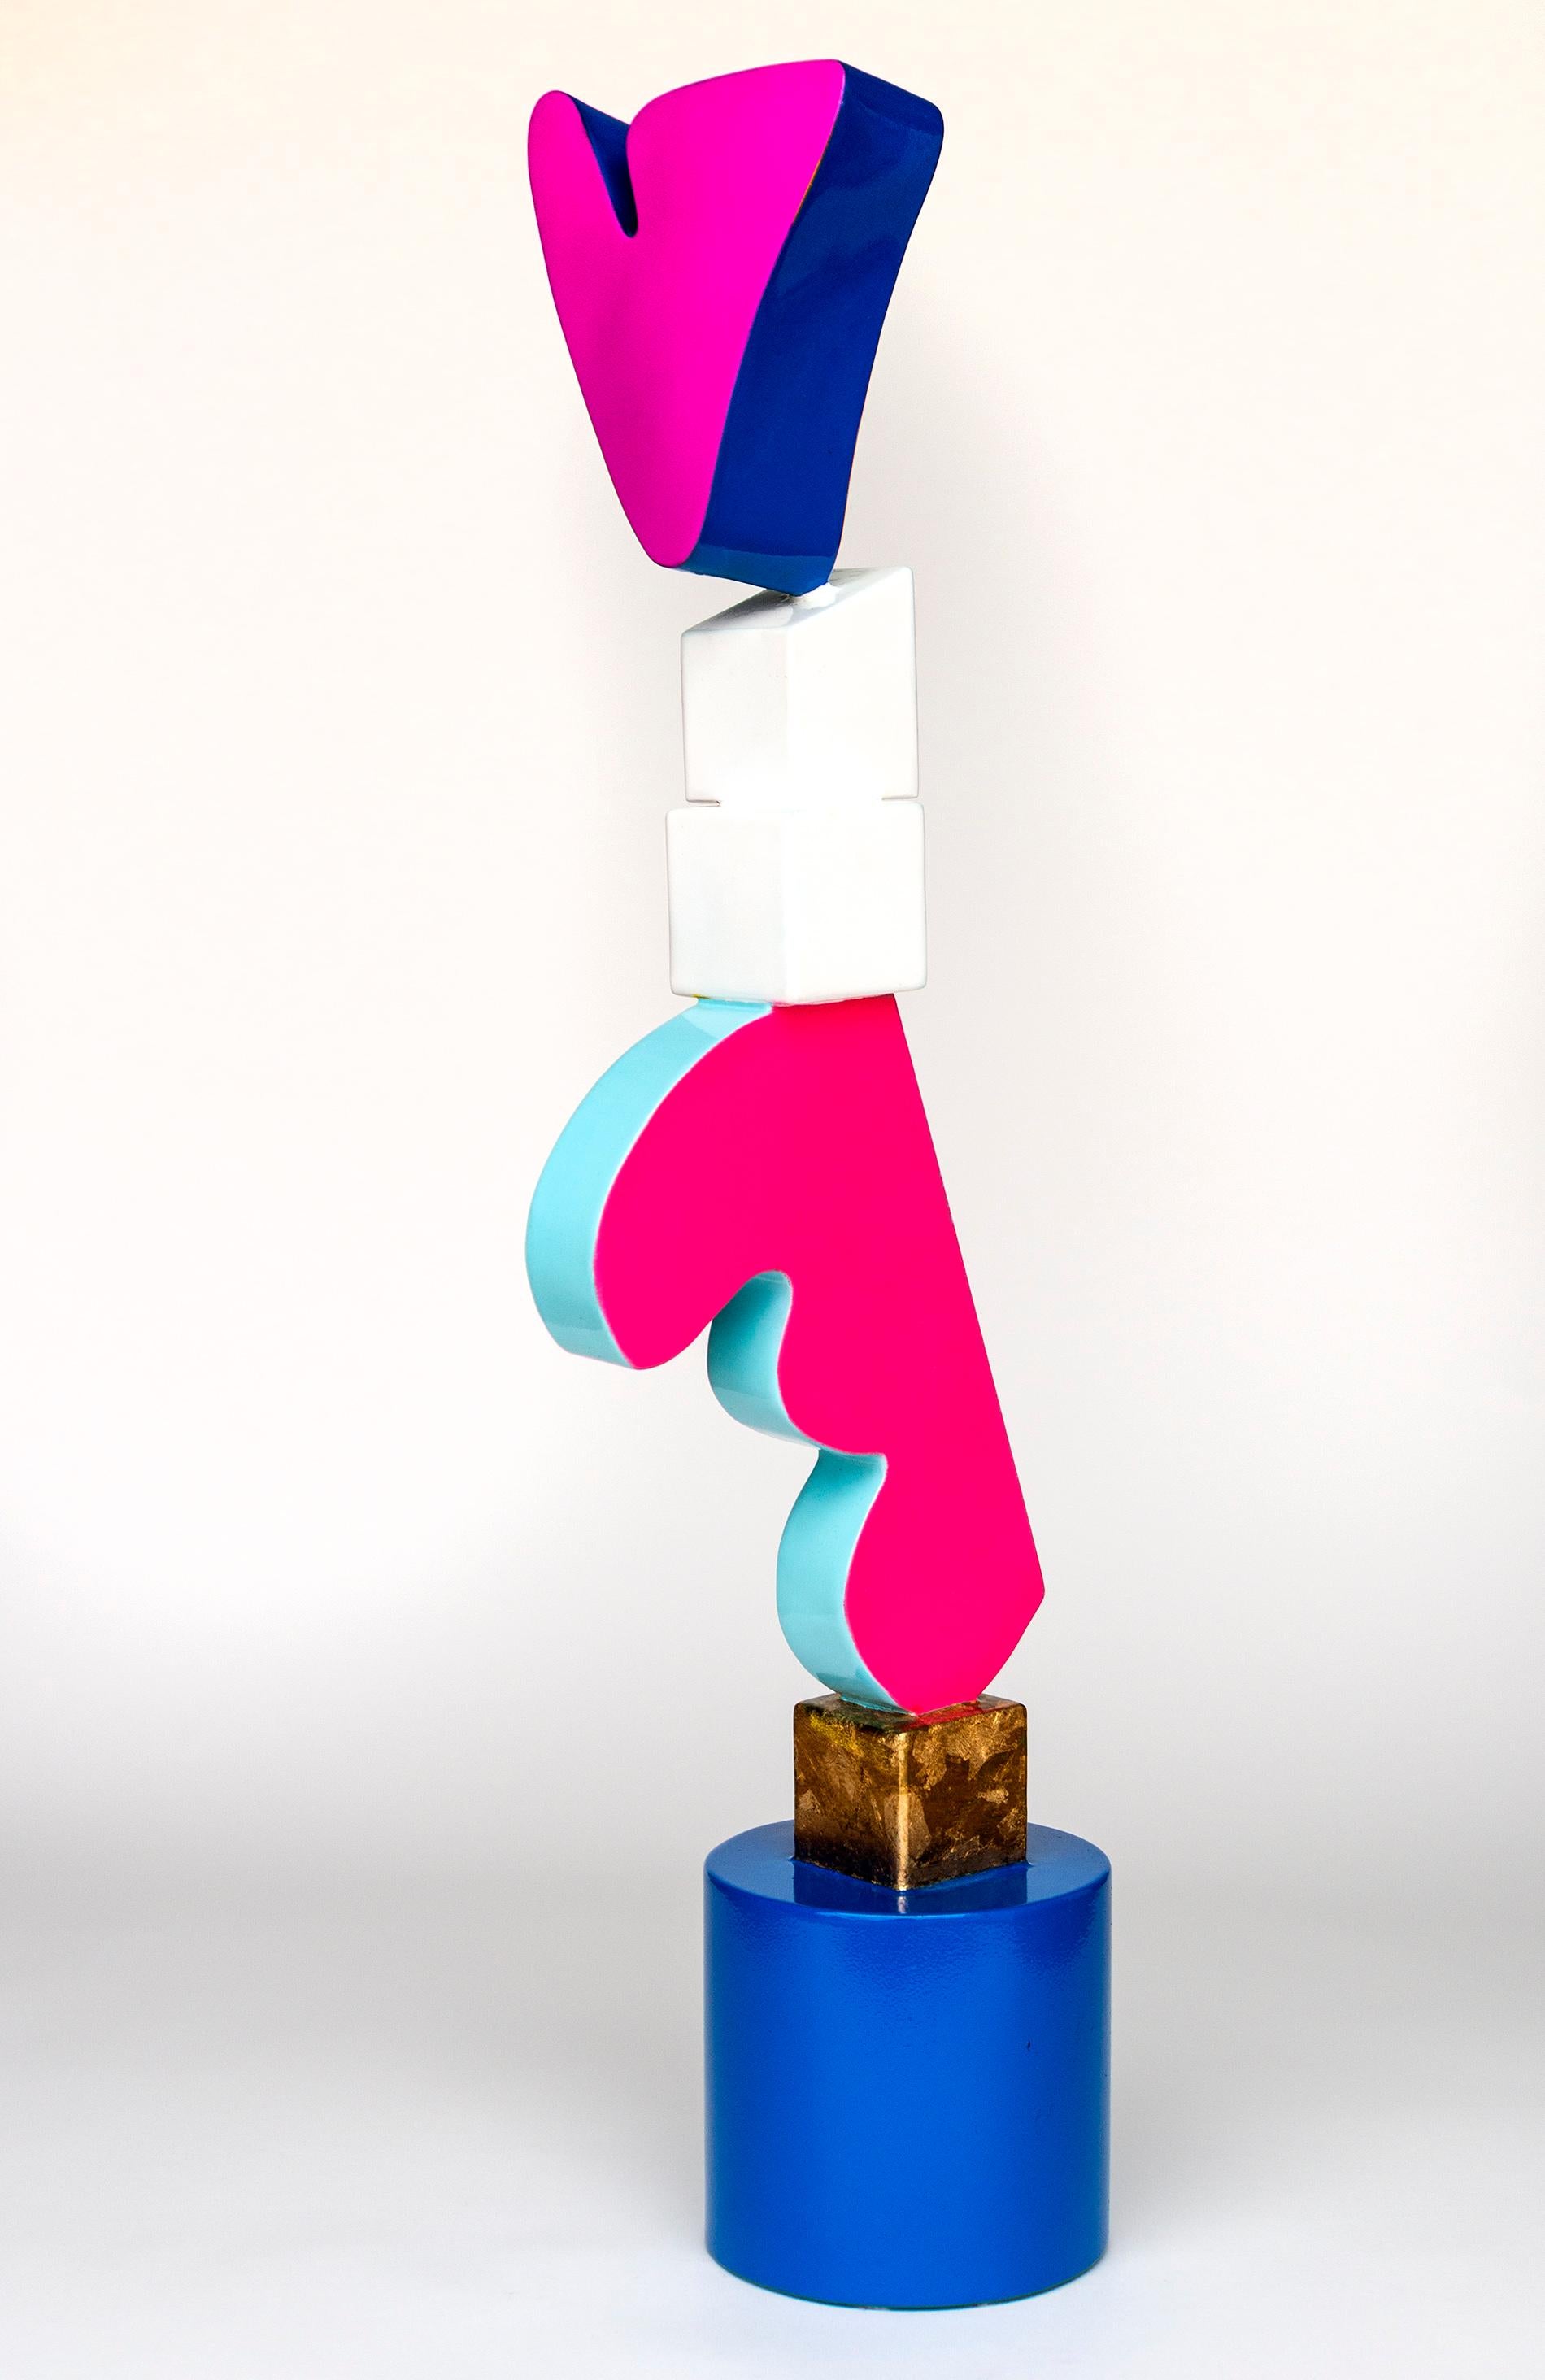 Purple Heart - bright, colourful, abstract, pop art, painted steel sculpture